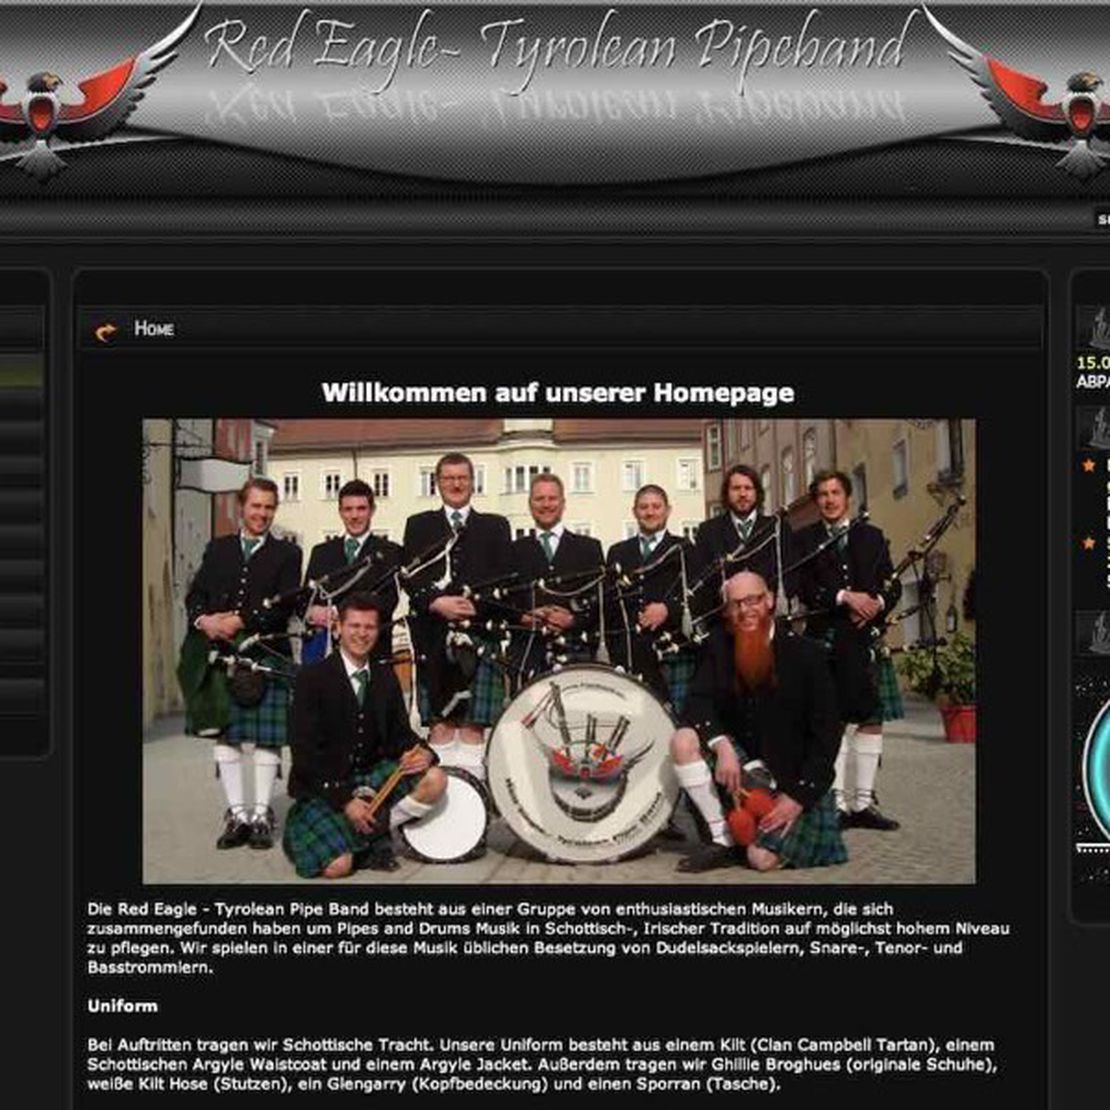 red eagle - tyrolean pipe band